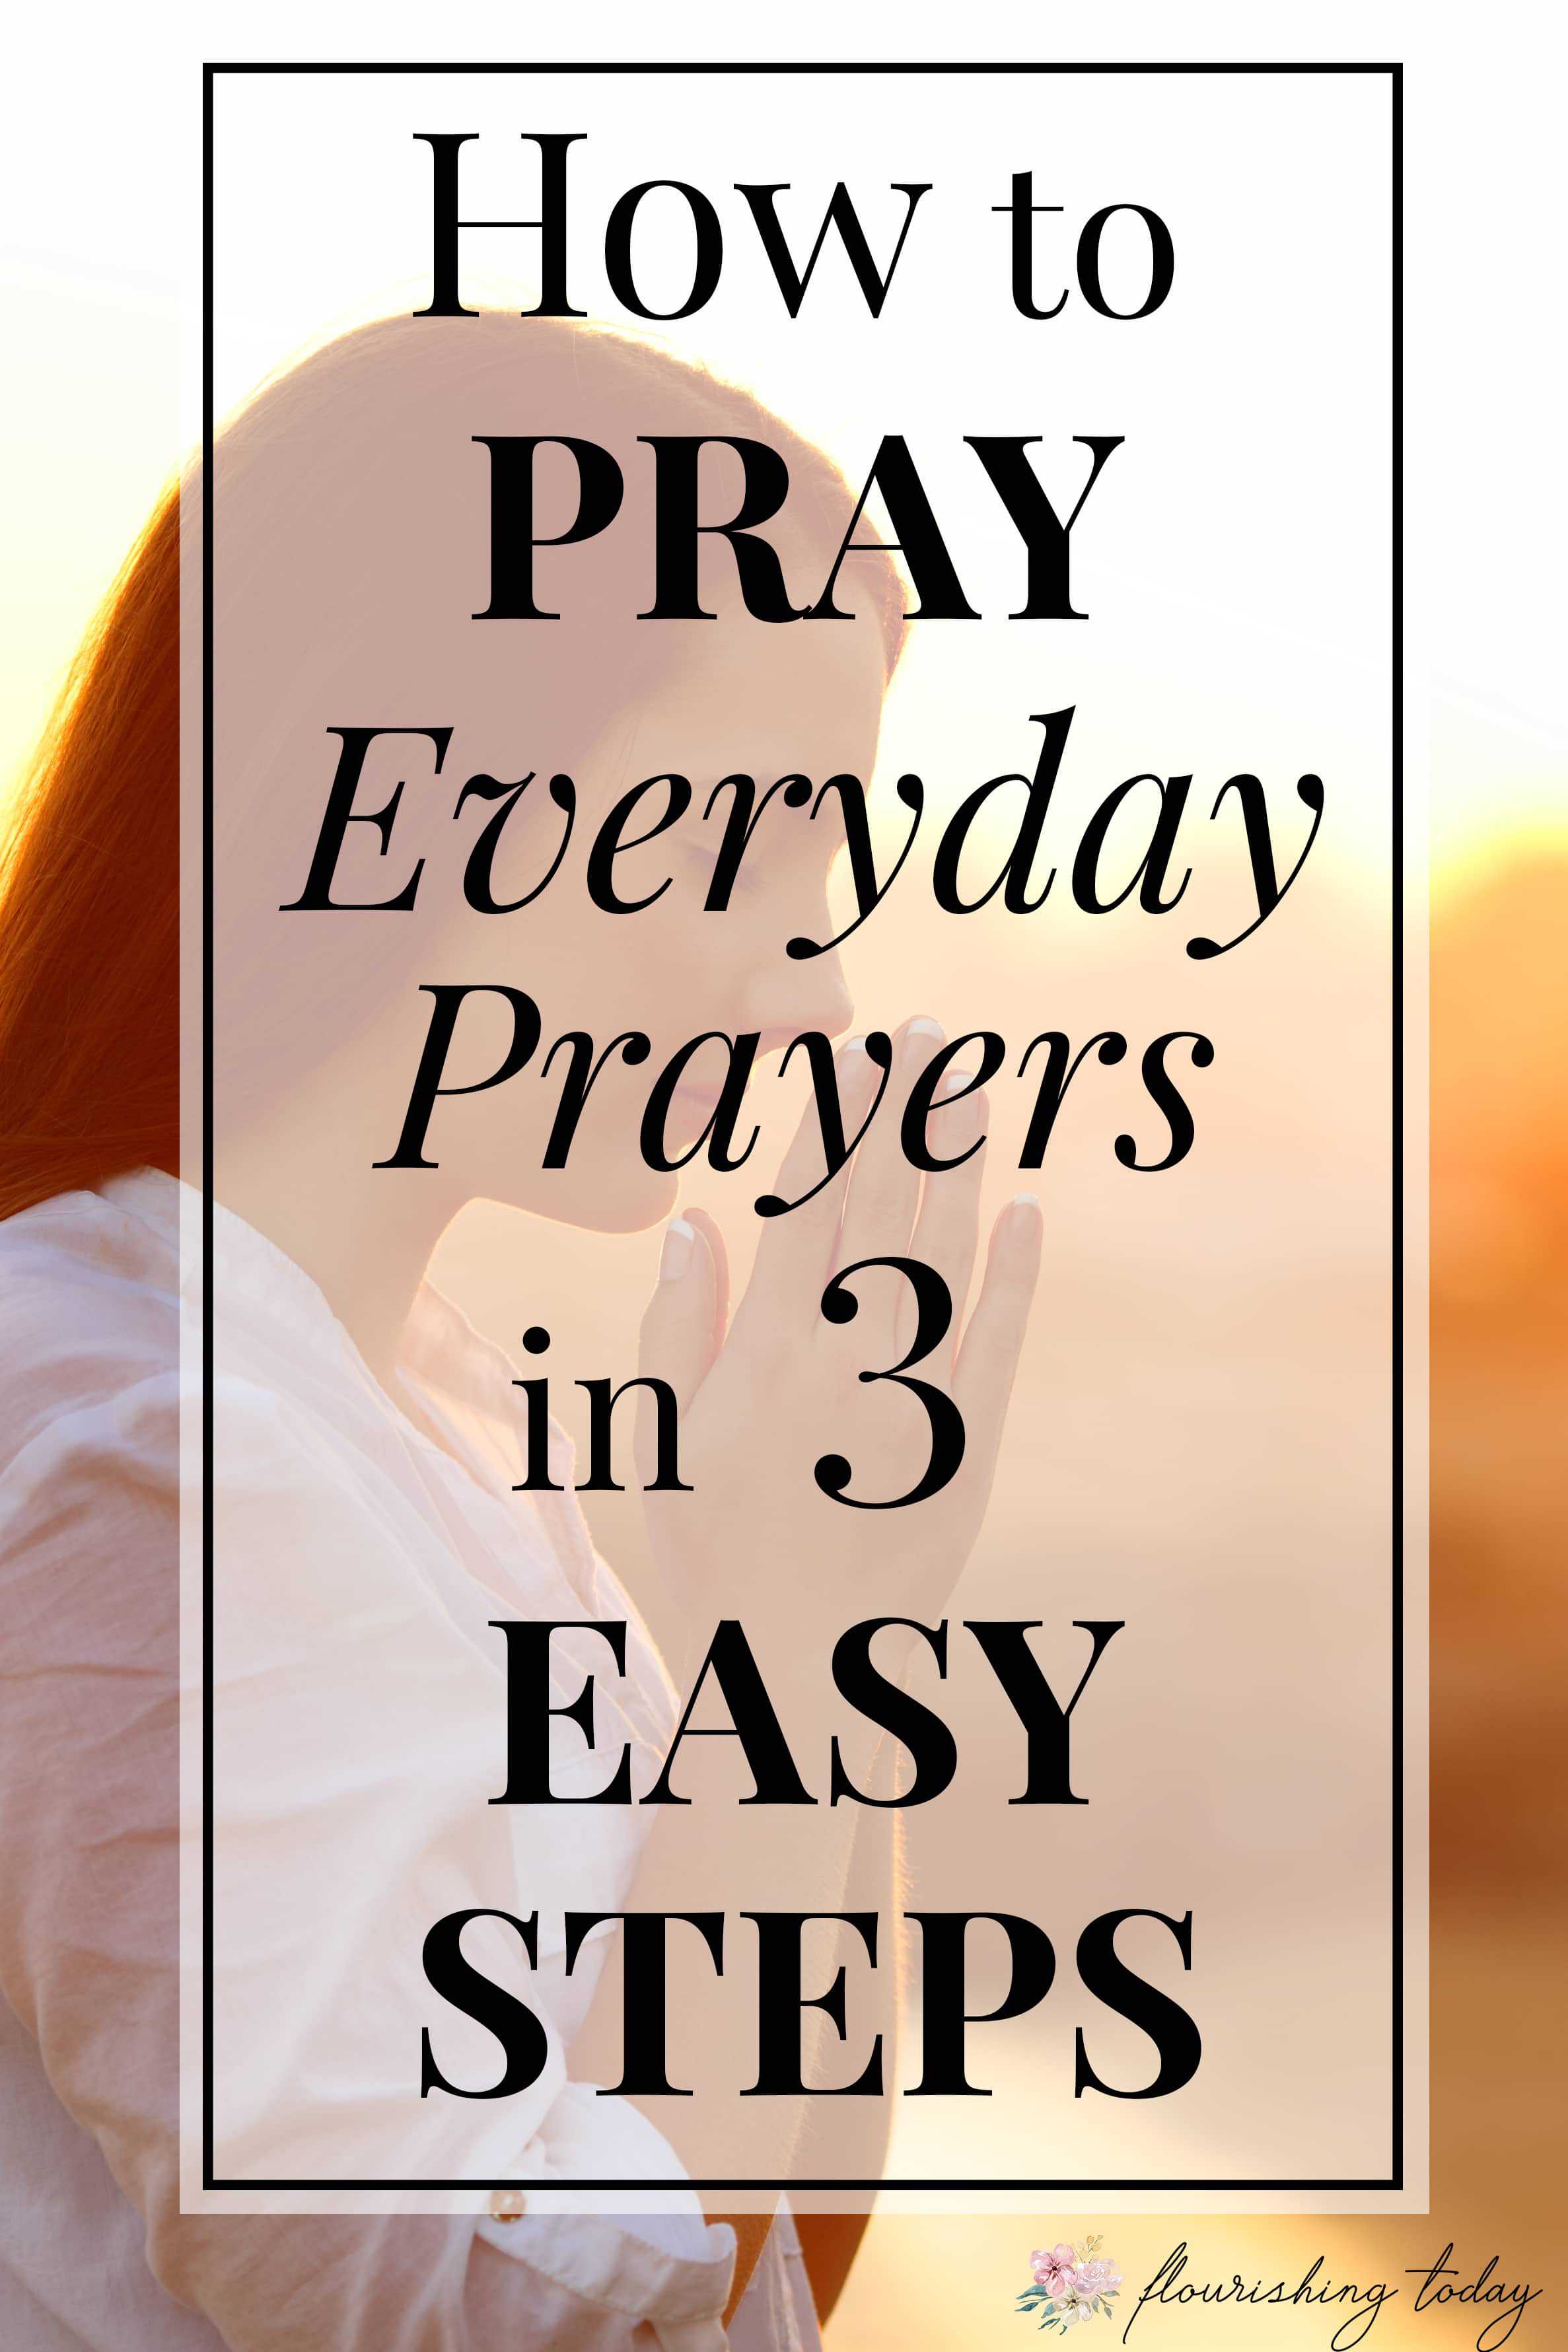 Do you struggle with how to pray everyday? Praying is simply talking to God and doesn't have to be complicated. Here are a few tips for beginners on how to pray to God daily. #prayers #dailyprayer #prayerforbeginners #praying